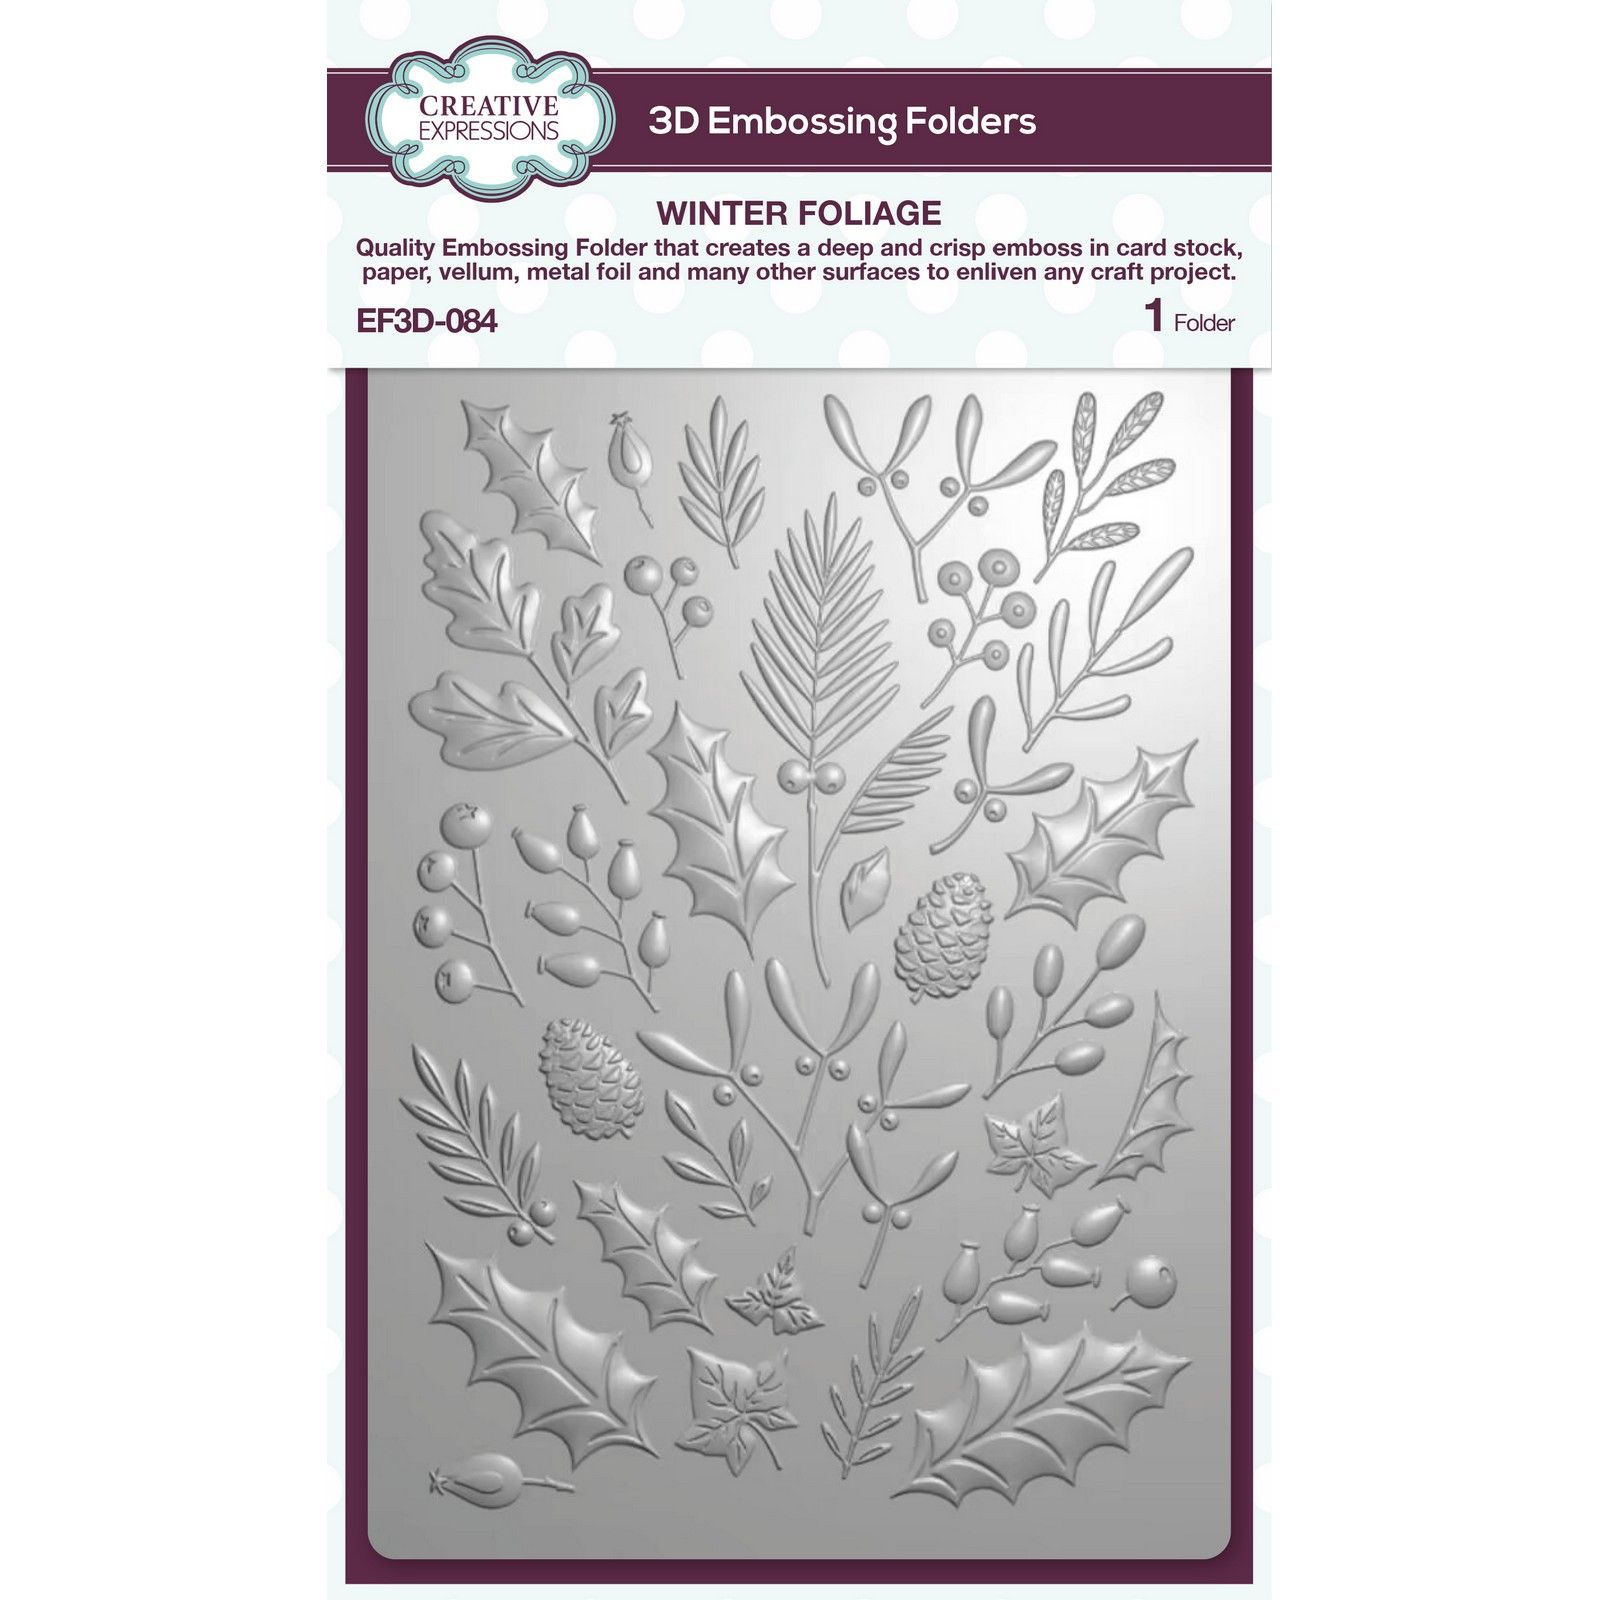 Creative Expressions • Winter Foliage 5 in x 7 in 3D Embossing Folder